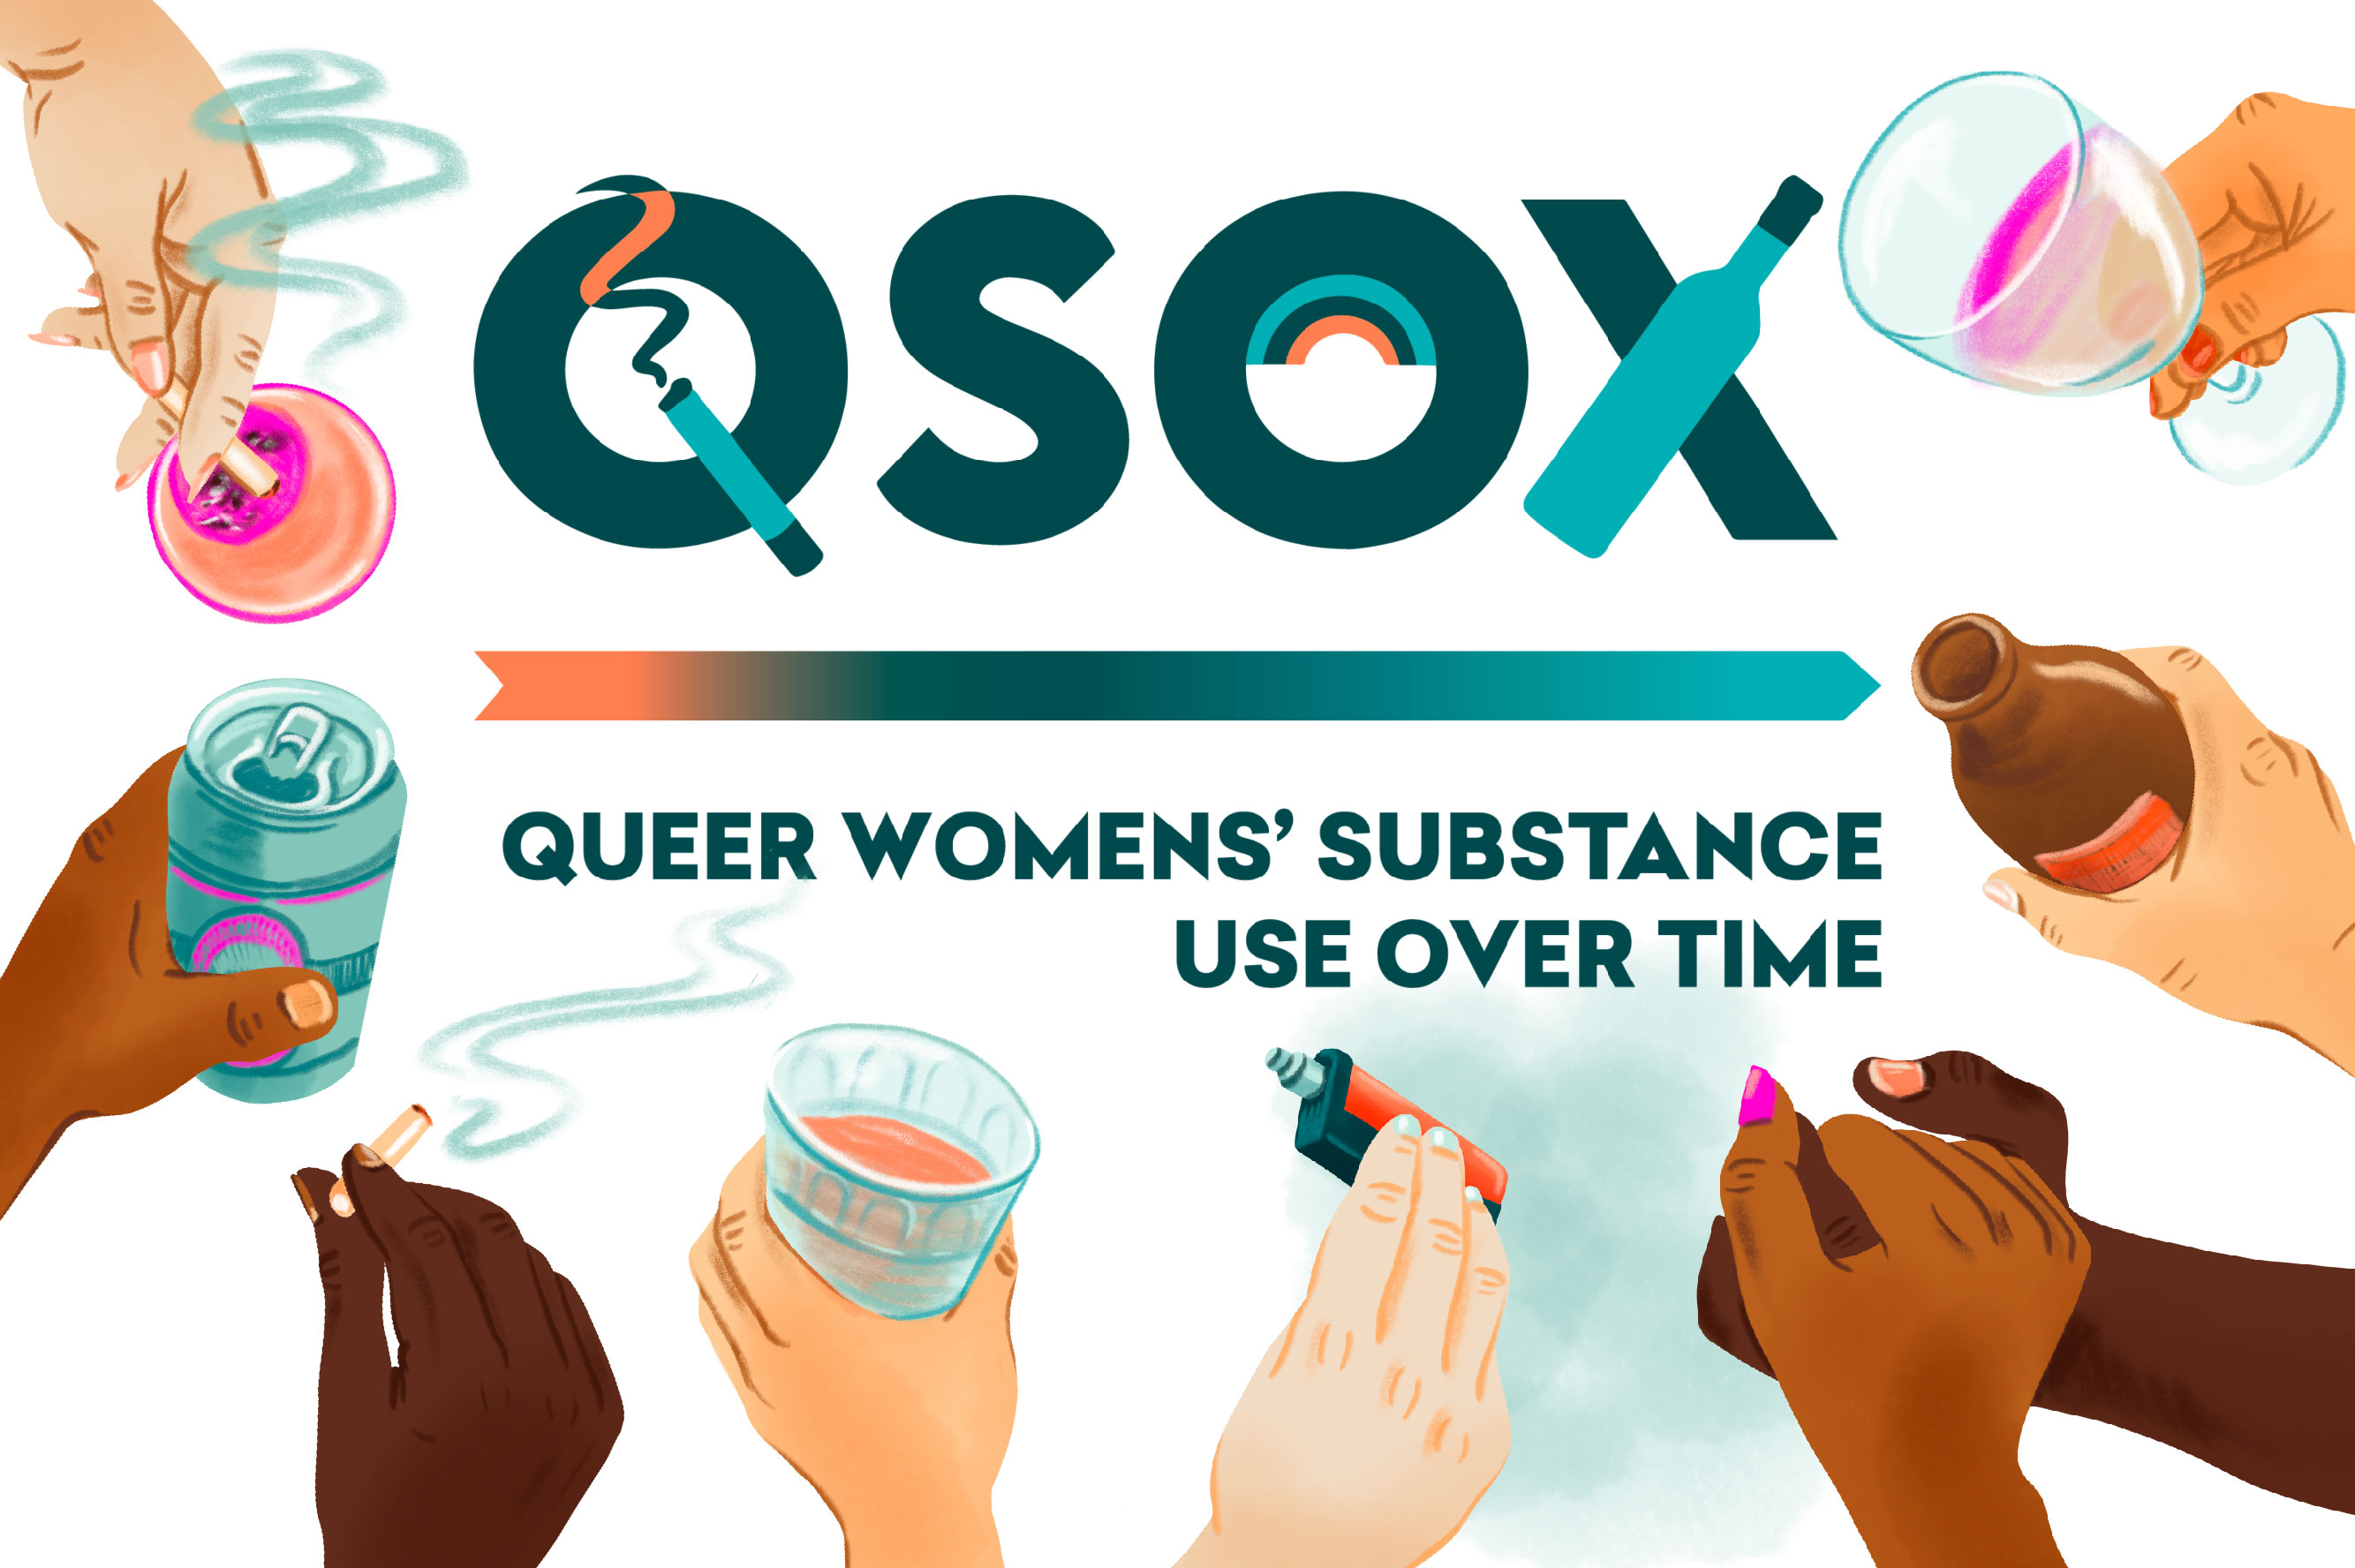 QSOX logo with a cigarette forming the Q tail, a wine bottle forming one arm of the X and a rainbow within the O. Logo is surrounded by diverse hands holding various cigarettes, vapes and alcoholic drinks. Two hands are holding each other.